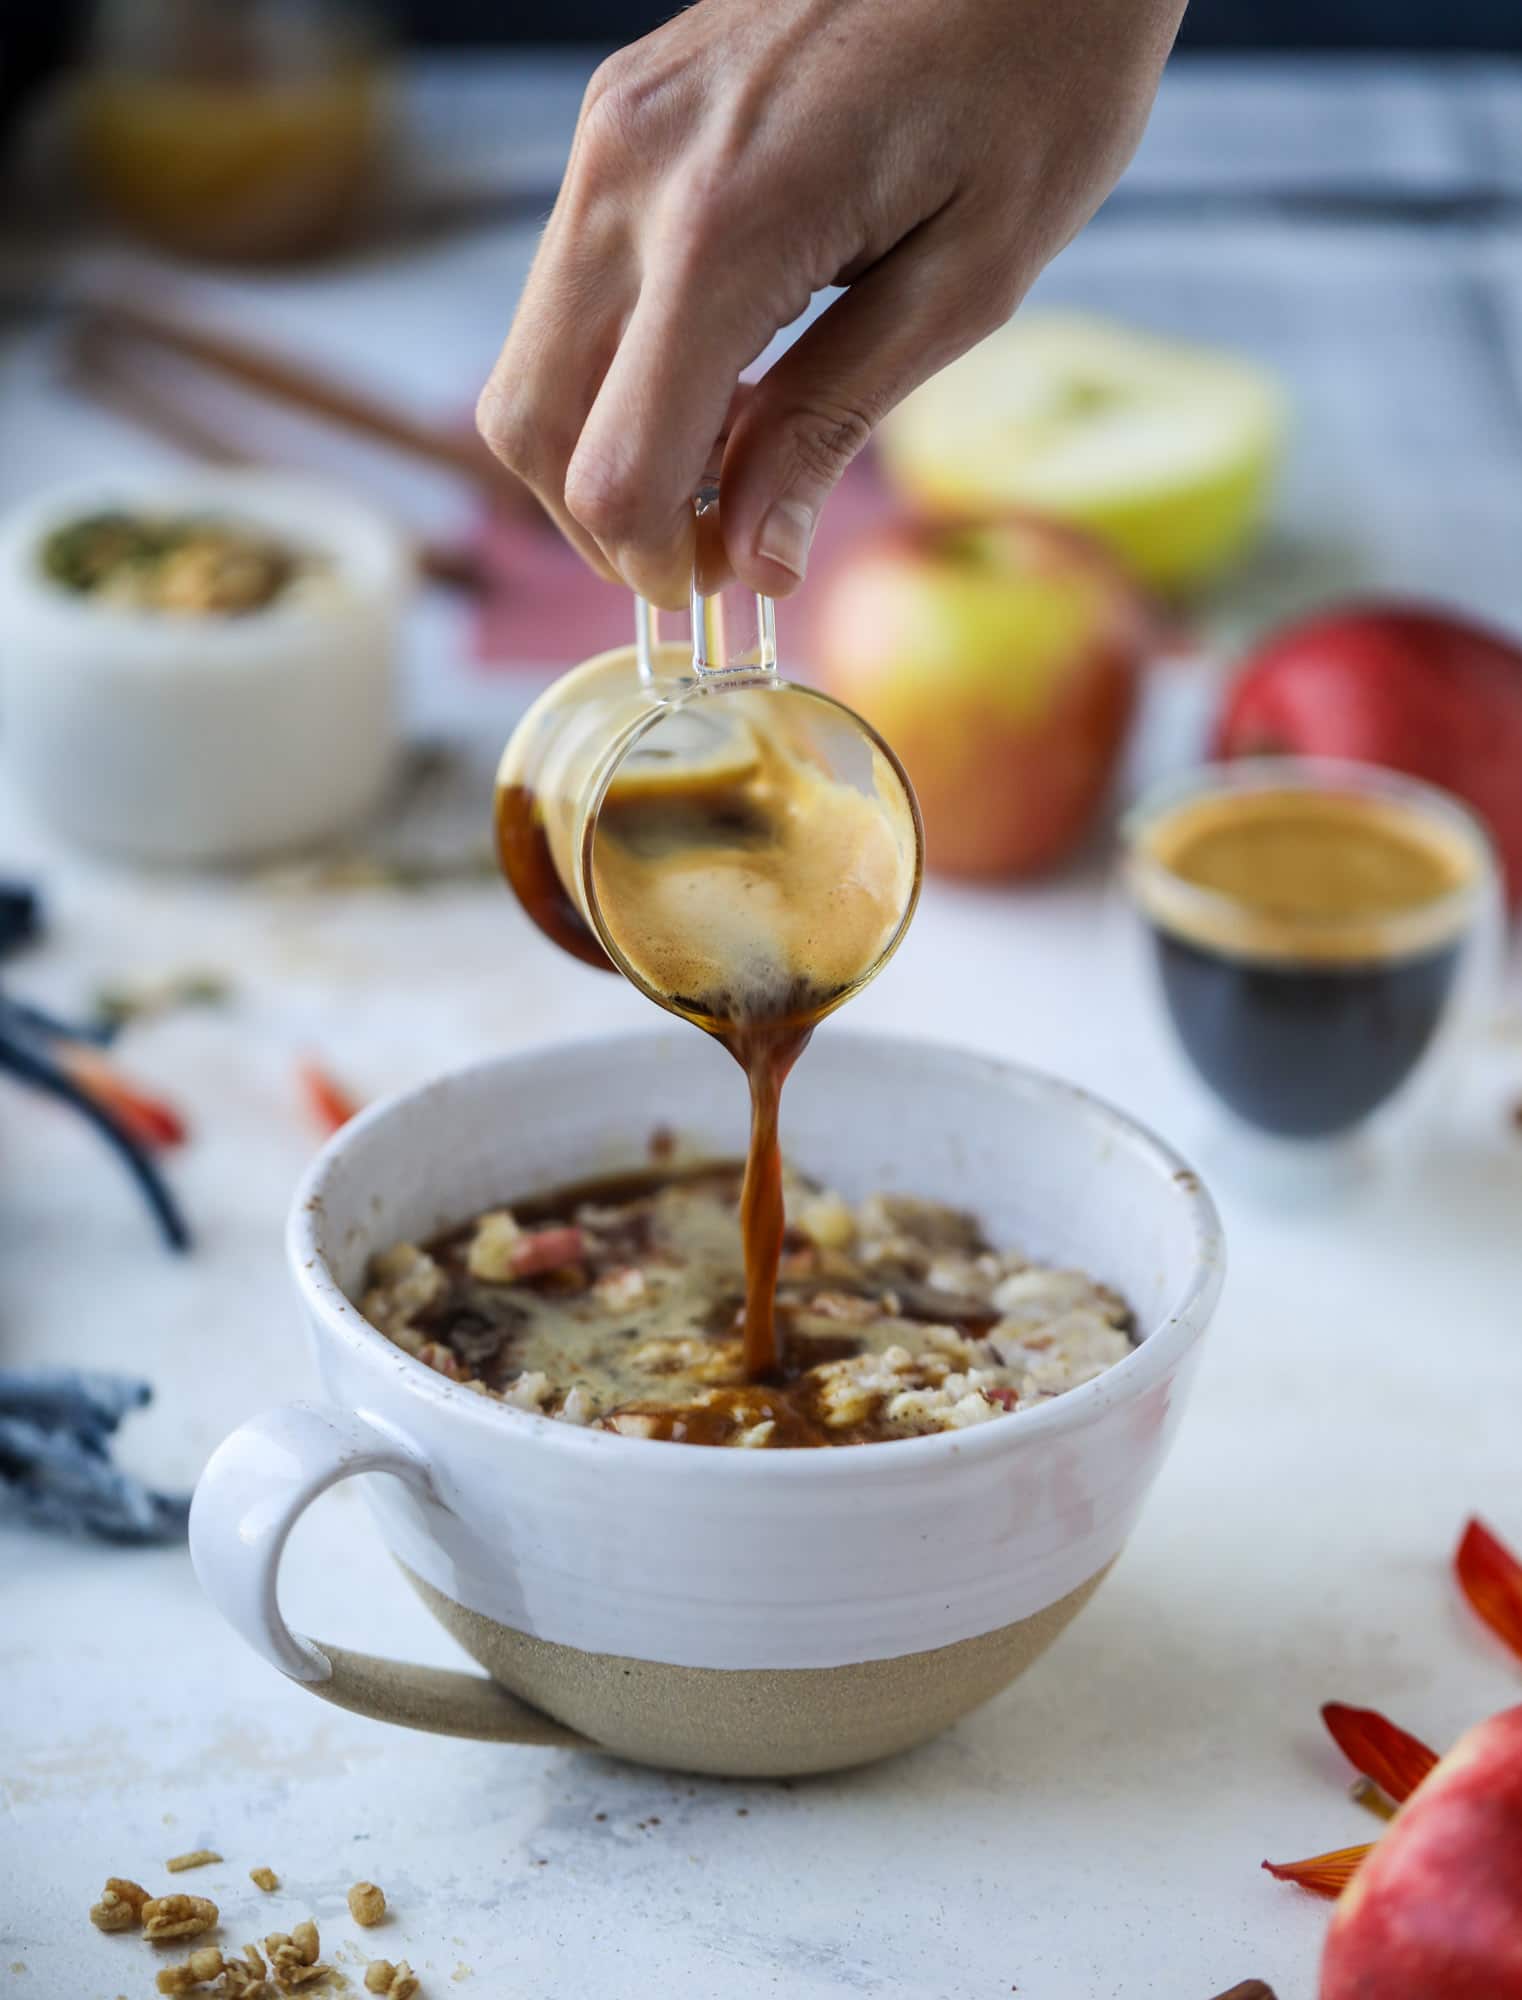 This oatmeal latte recipe is the best of both worlds! Creamy, dreamy apple cinnamon oatmeal combined with freshly brewed espresso makes for the best breakfast every. Satisfying and caffeinating! I howsweeteats.com #oatmeal #latte #apple #cinnamon #breakfast #coffee